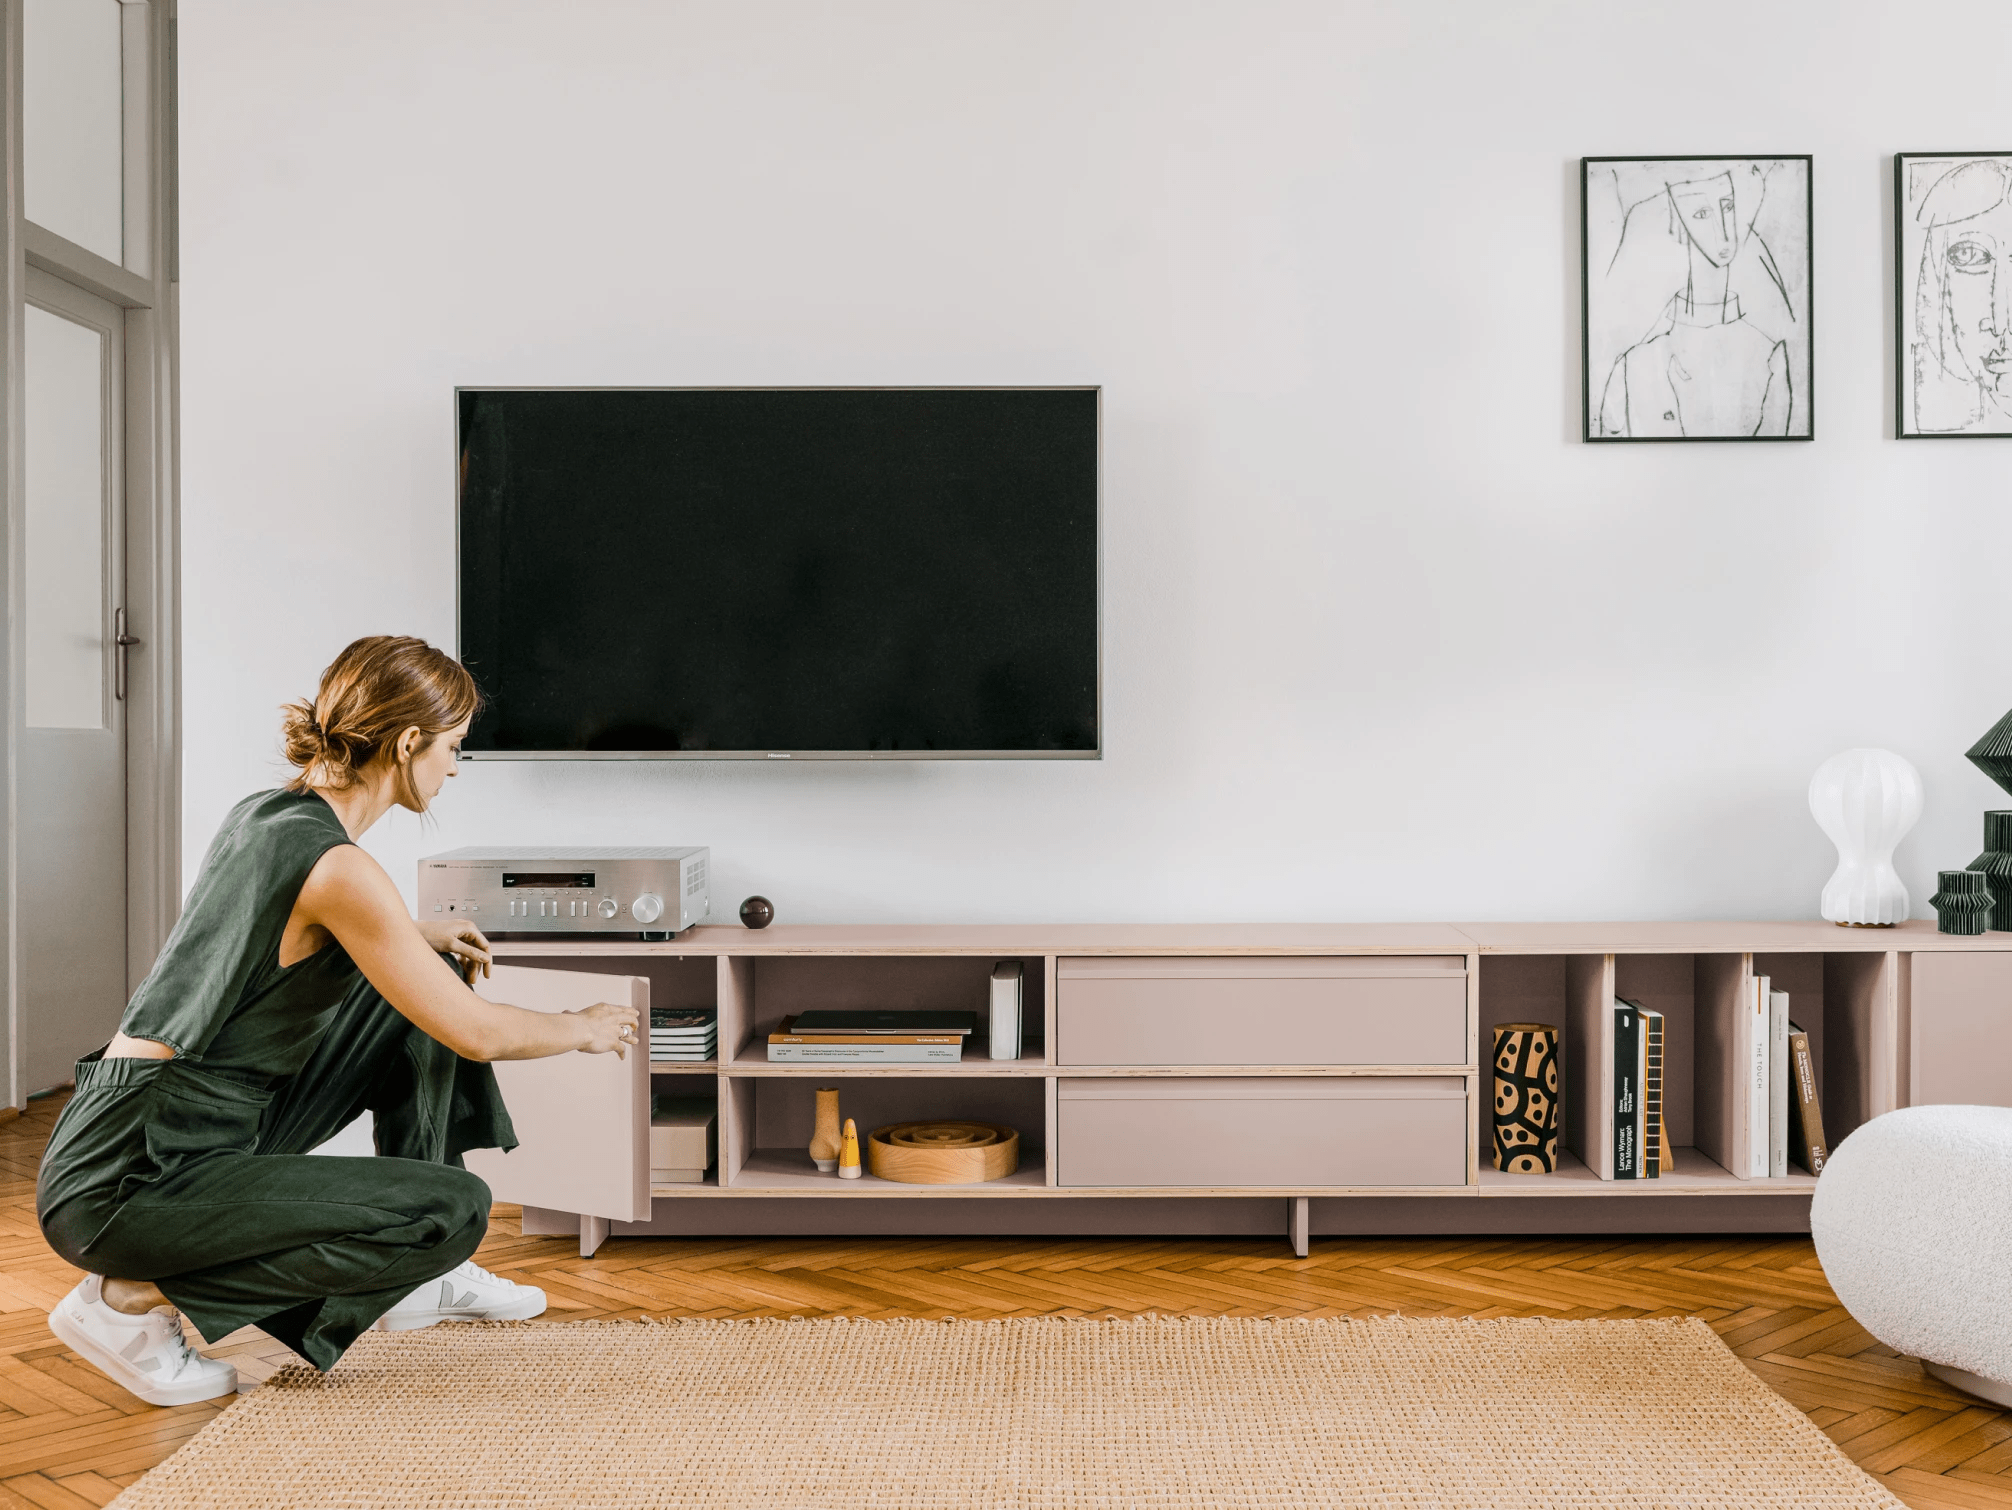 Deep Dusty Pink Plywood Tv Stand with Drawers and Cable Management plywood - 190x53x40cm 2